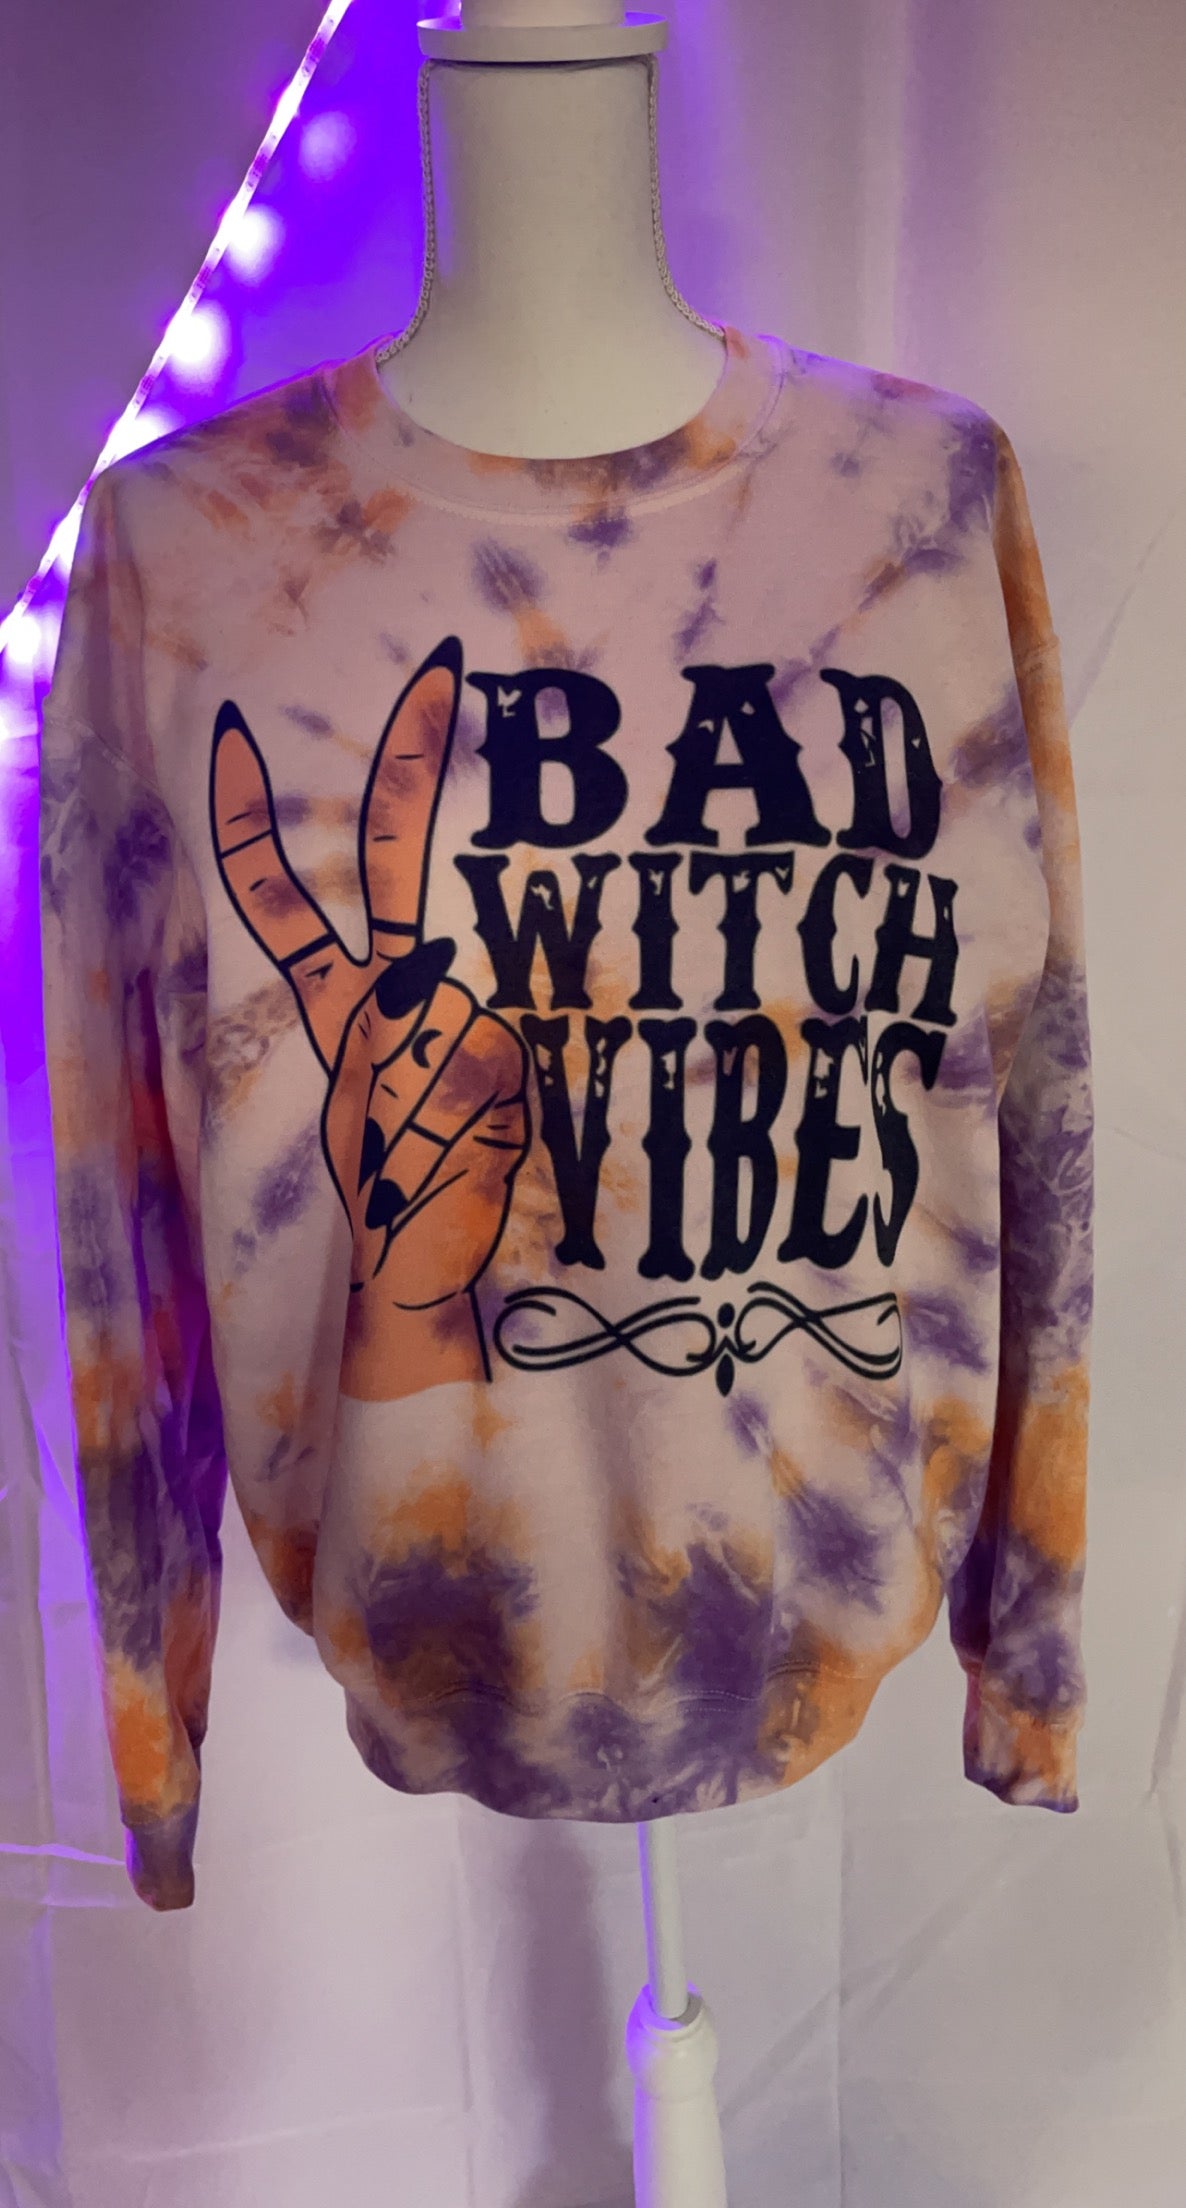 Bad witch vibes 🖤💜🧡✌️